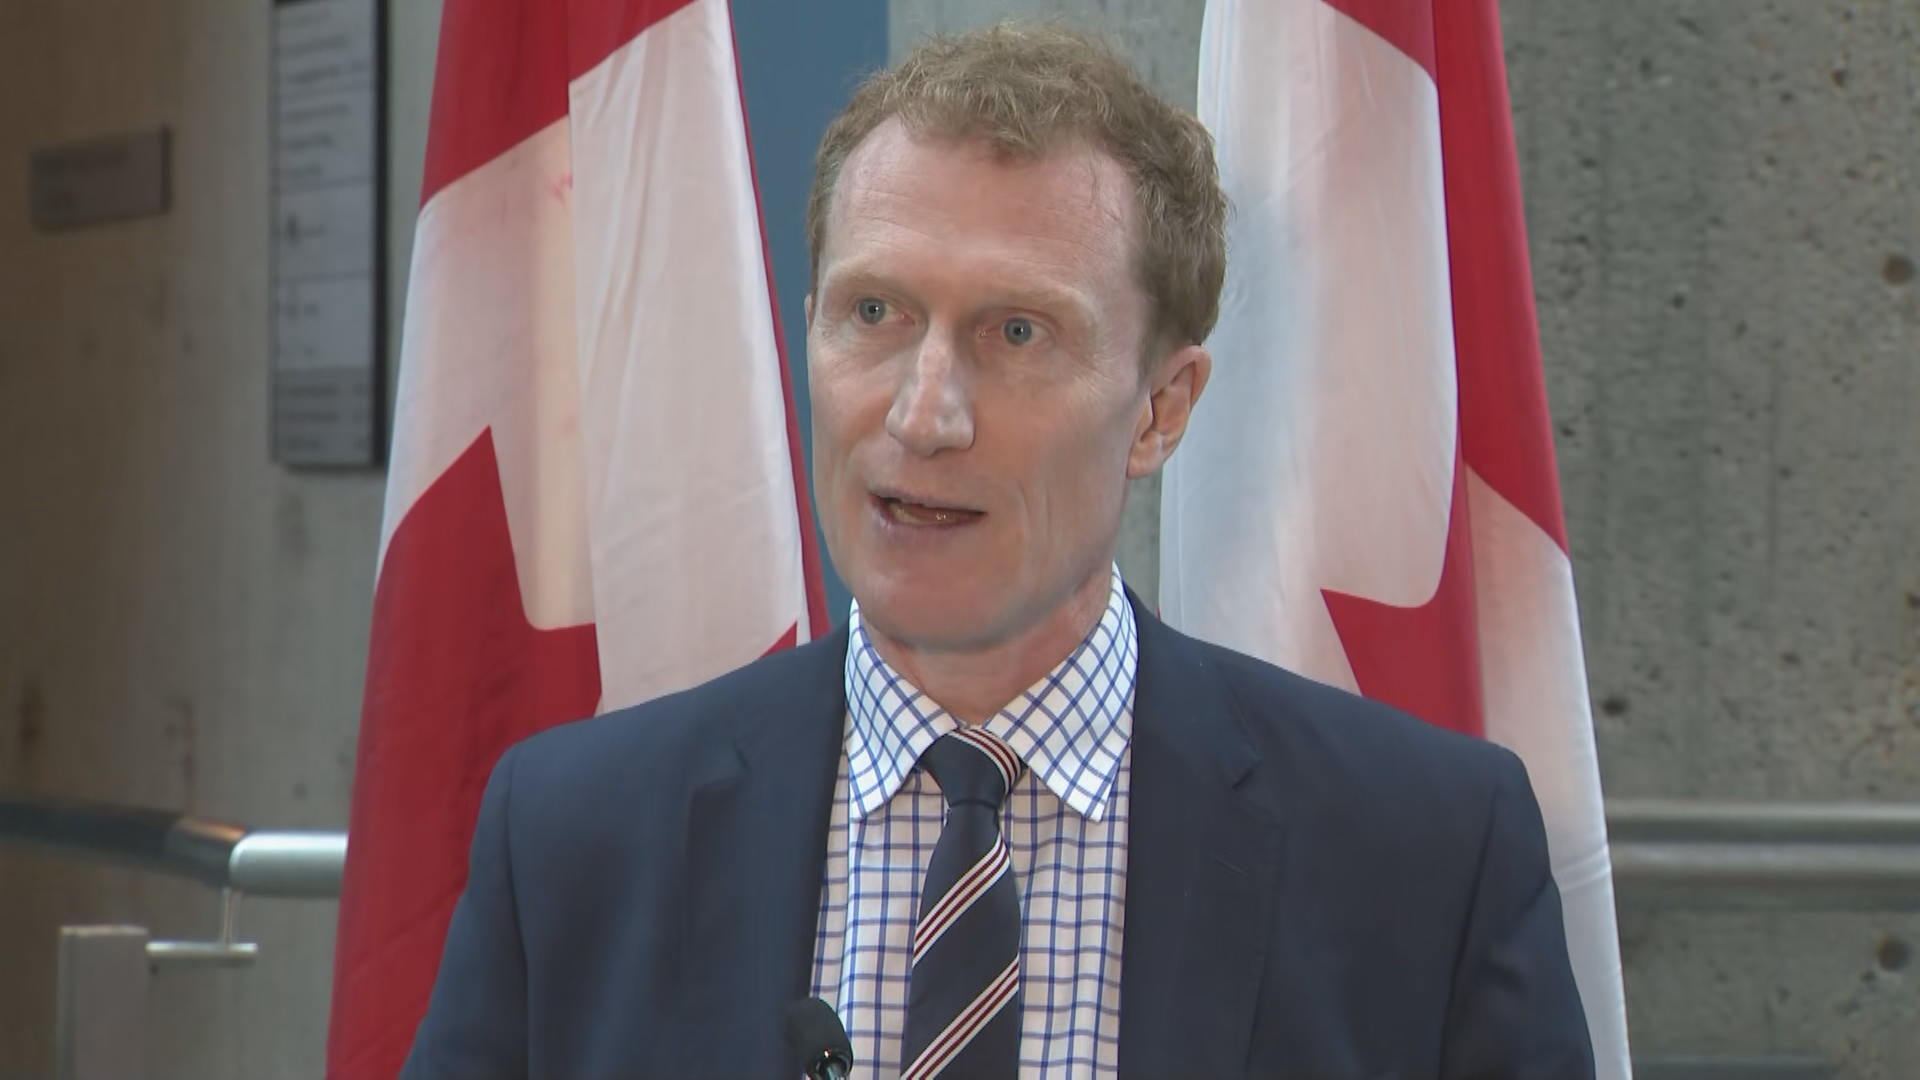 International student numbers could be restricted further, immigration minister says in Halifax